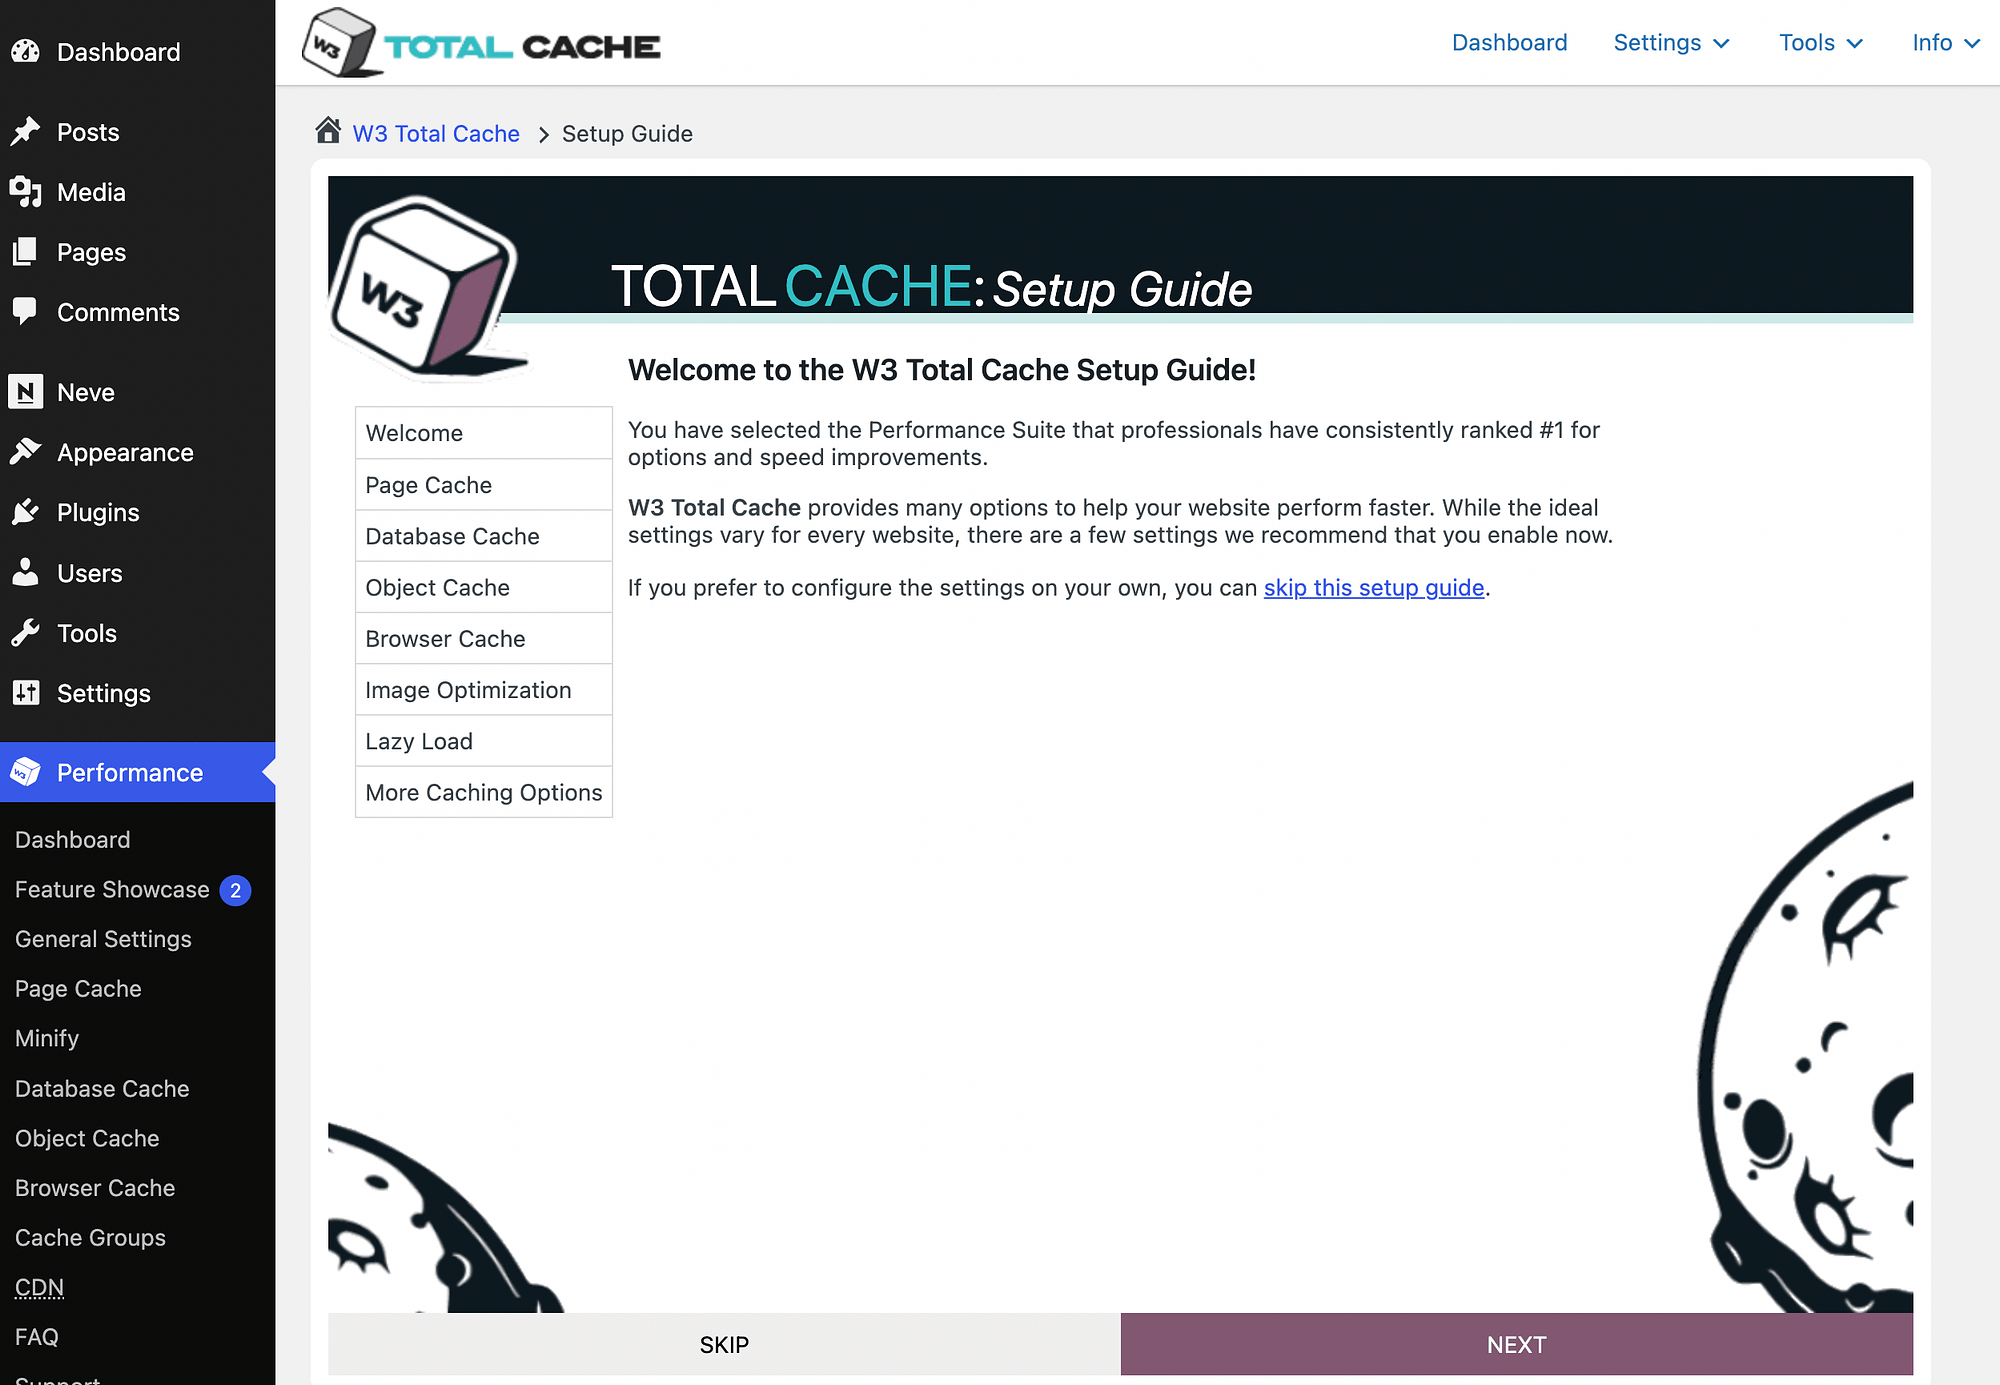 The welcome page of the W3 Total Cache setup guide.